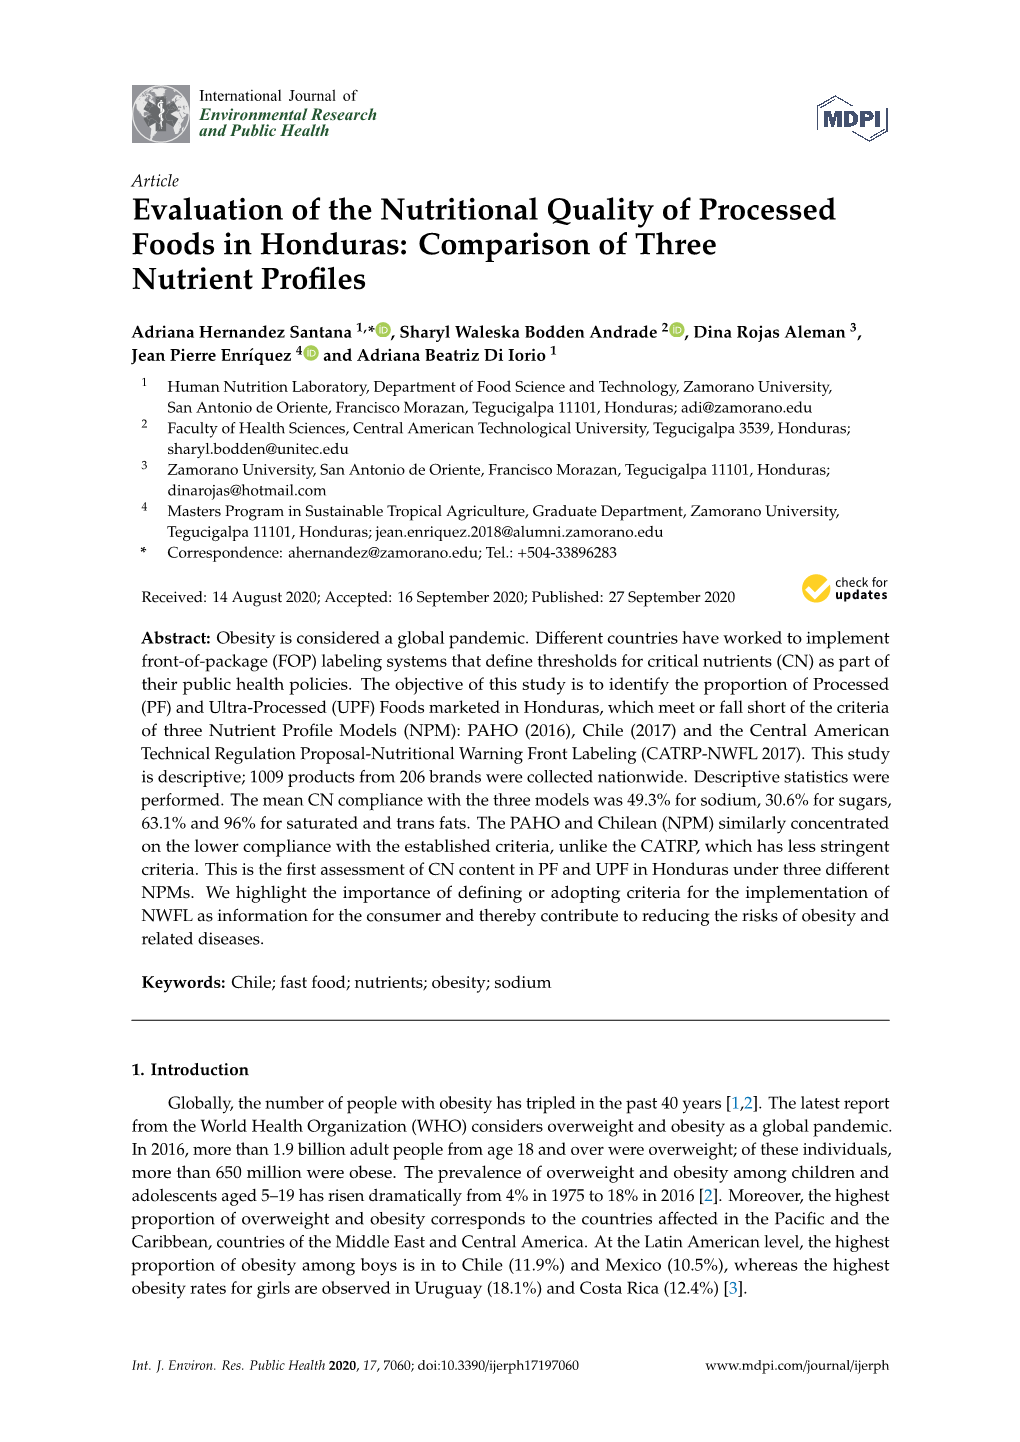 Evaluation of the Nutritional Quality of Processed Foods in Honduras: Comparison of Three Nutrient Proﬁles